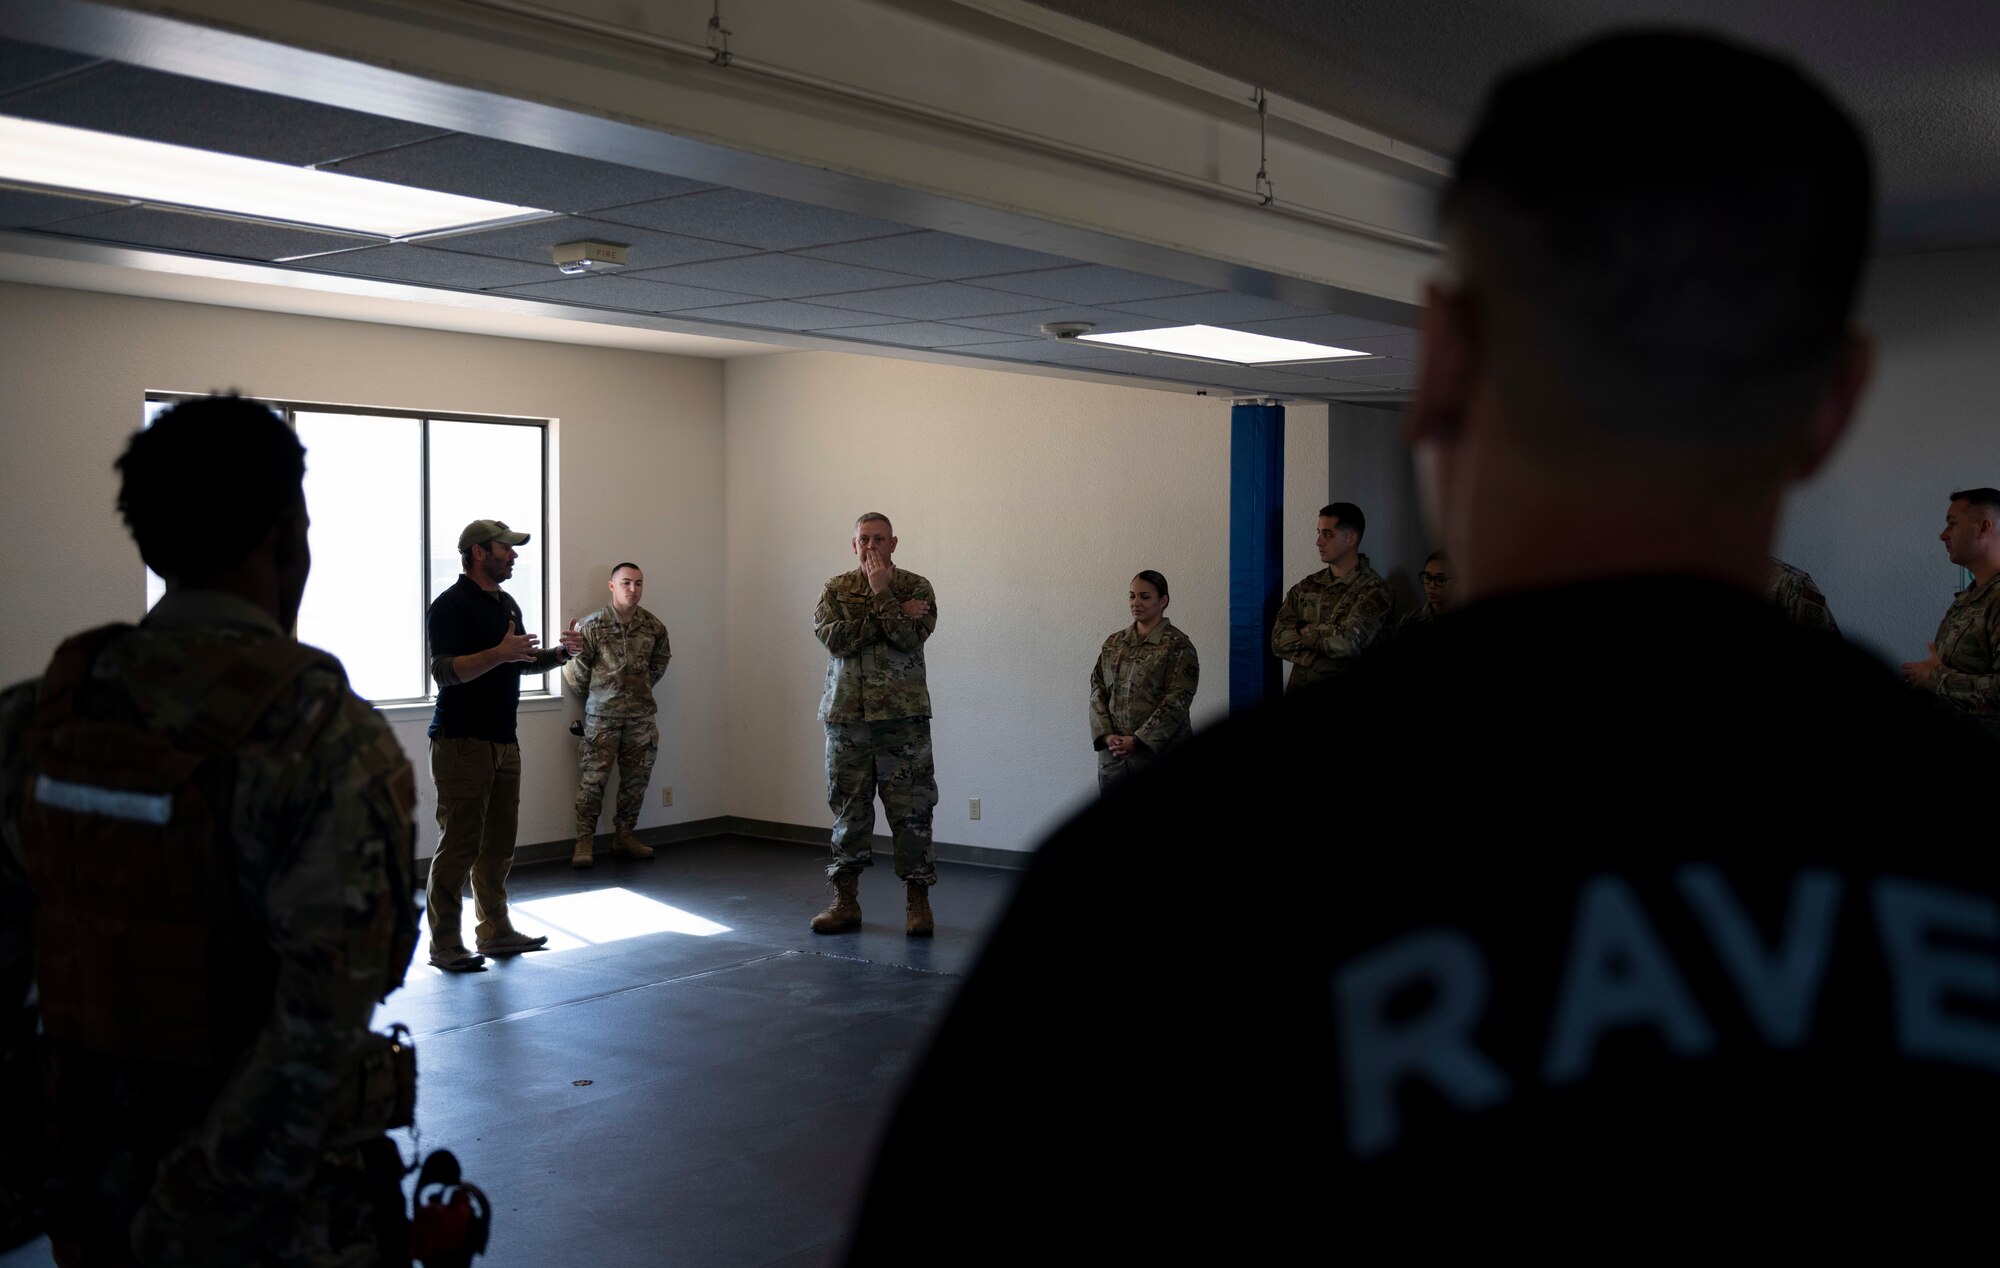 Photos of Security Forces phoenix ravens giving a demonstration of their capabilities to Wing Leadership.